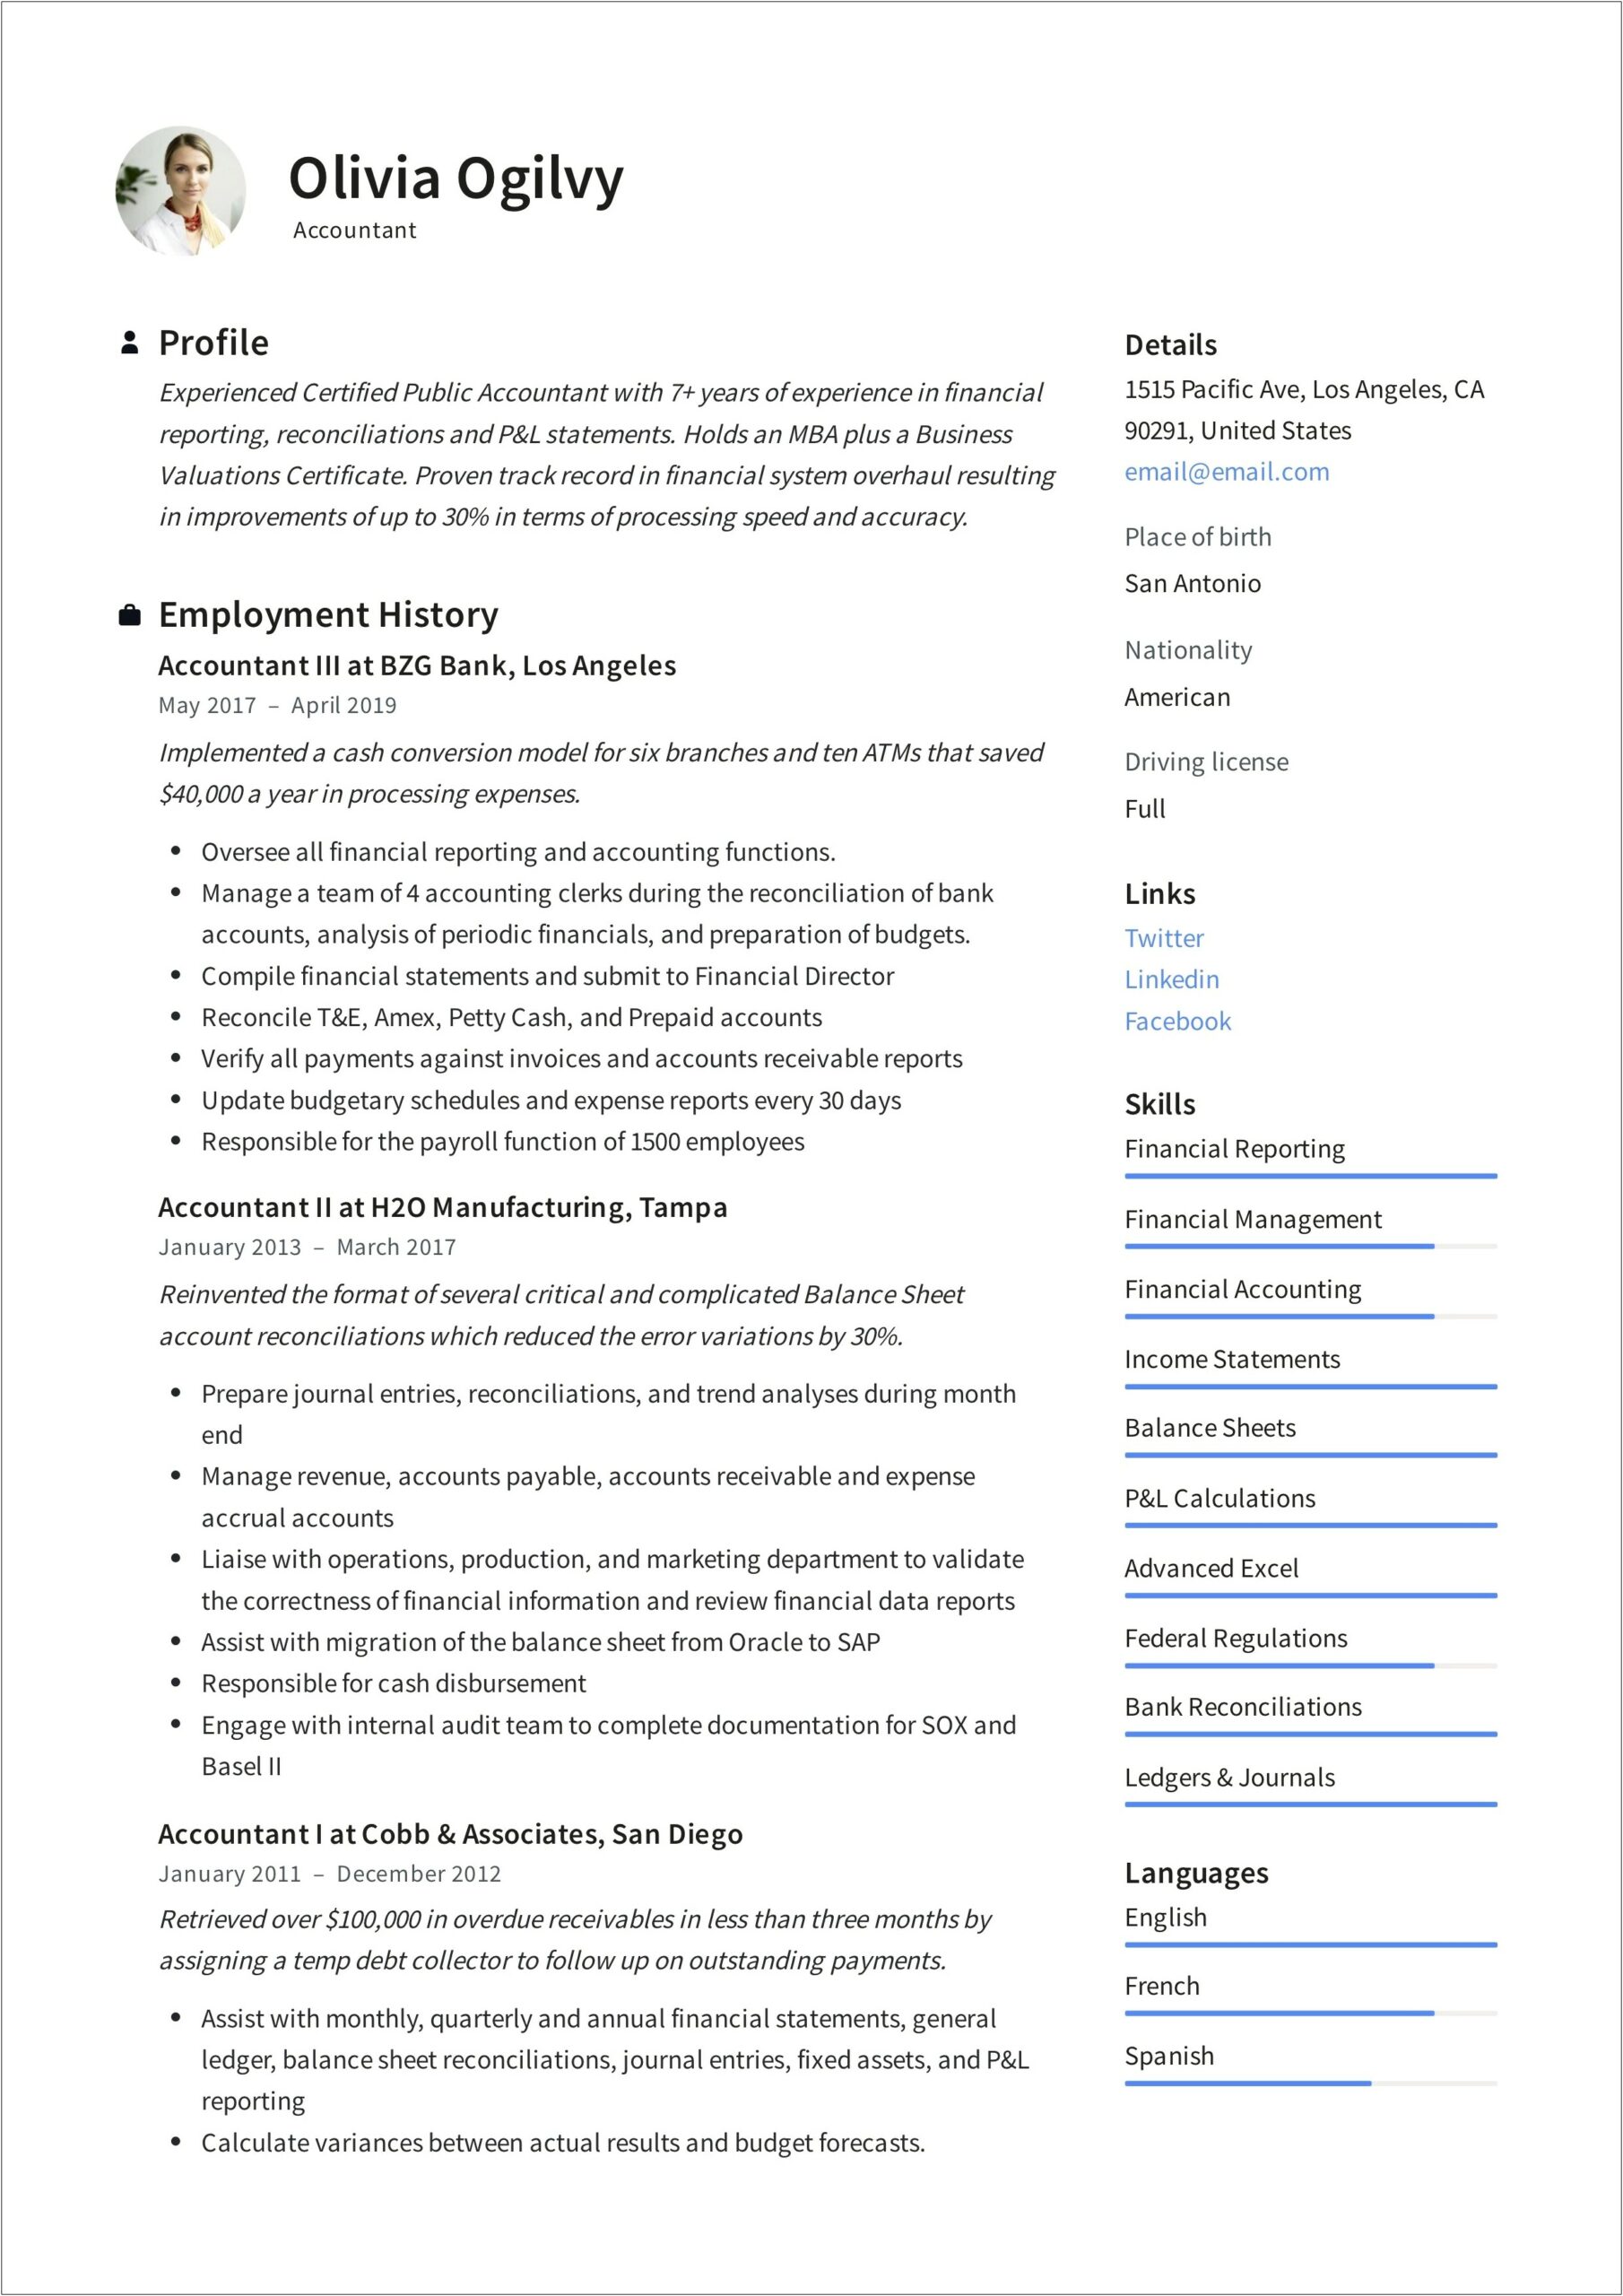 Sample Of A Professional Accountant Resume